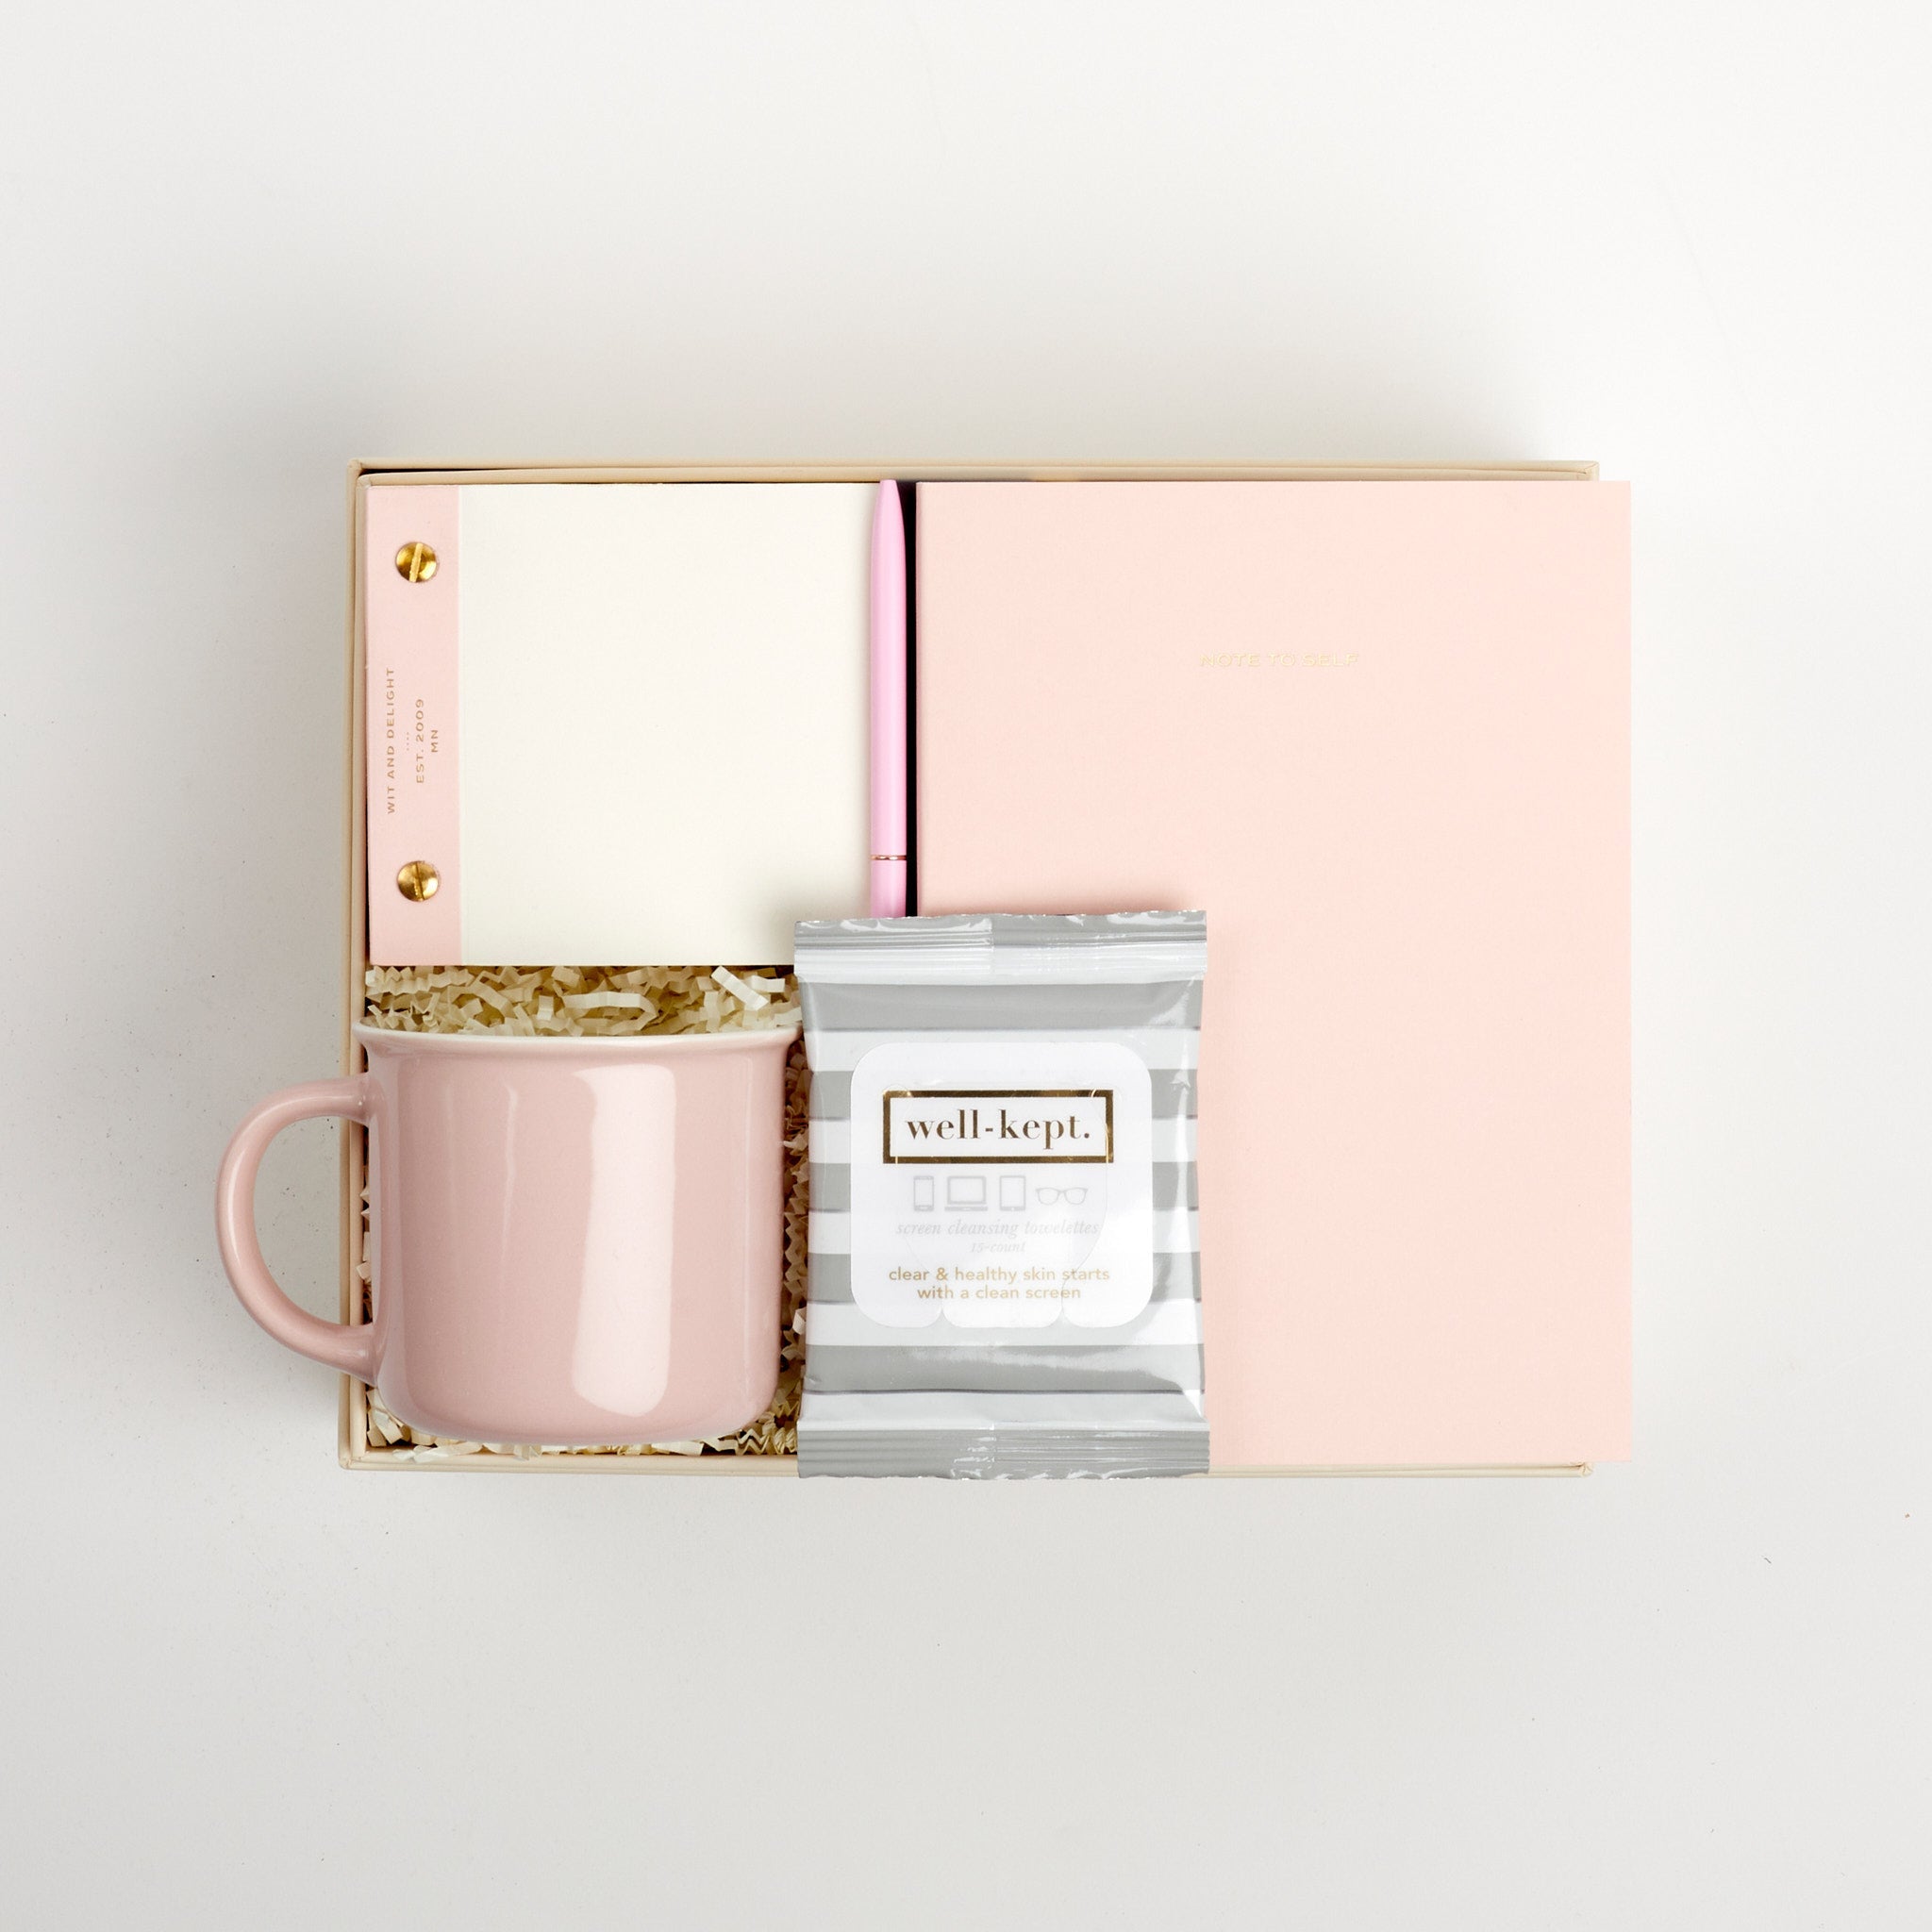 BOXFOX Original Creme Hustle Gift Box packed with Wit & Delight Pink Note to Self Journal, BOXFOX Pink Ceramic Mug, Well-Kept Hampton Tech Wipes, Sugarpaper Pink To Do Pad, and BOXFOX Pink Bullet Pen.